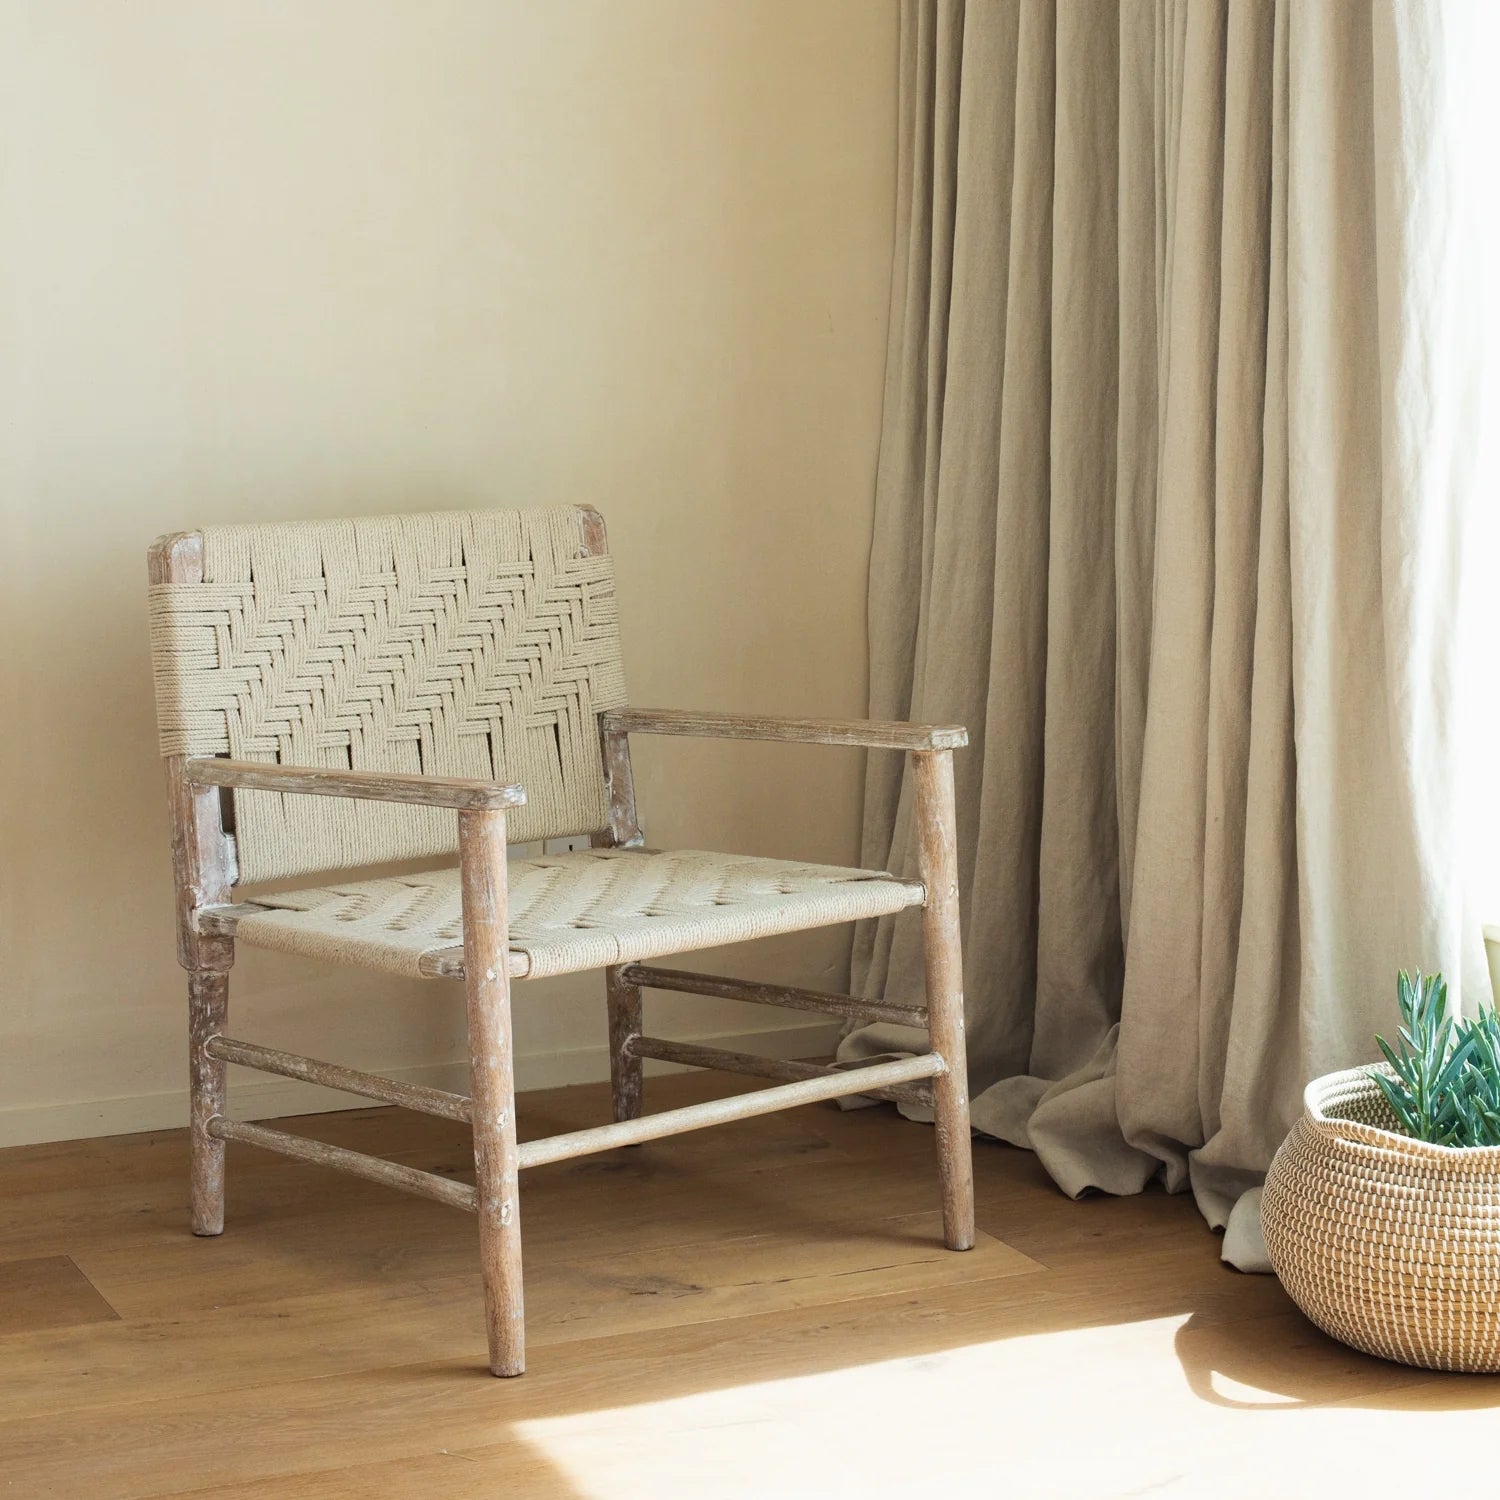 The Lulworth Rustic Wooden Armchair in a neutral living room with a small basket and plant.